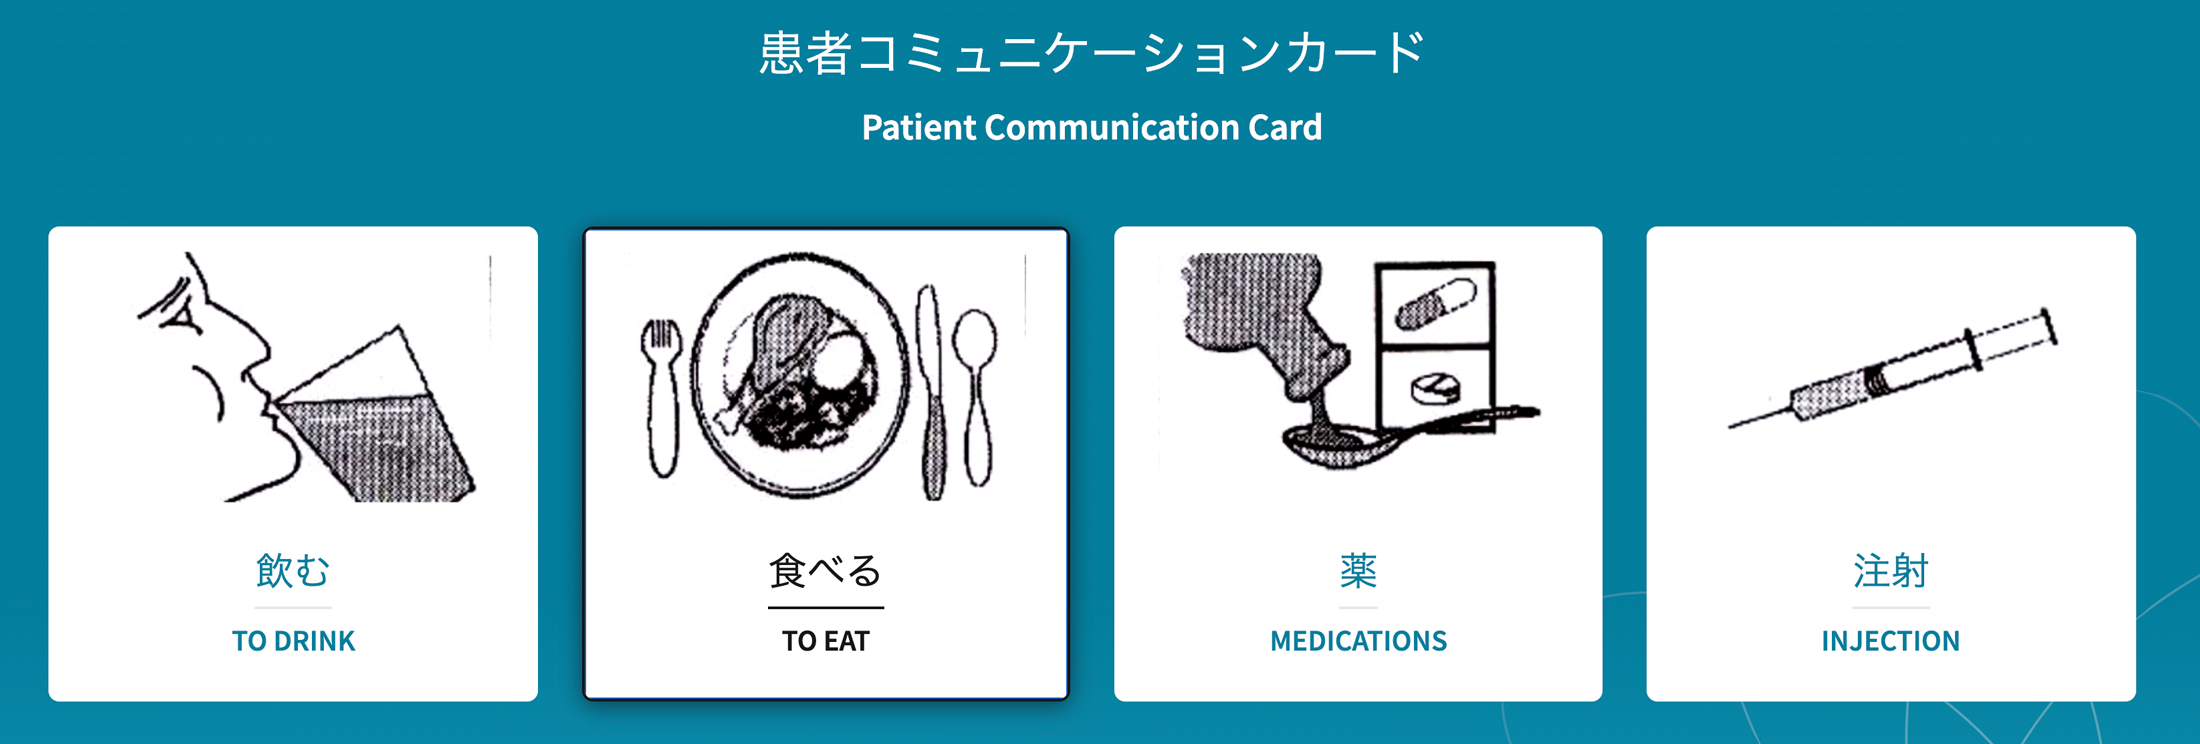 patient communication card with images of common patient requests translated into english and japanese